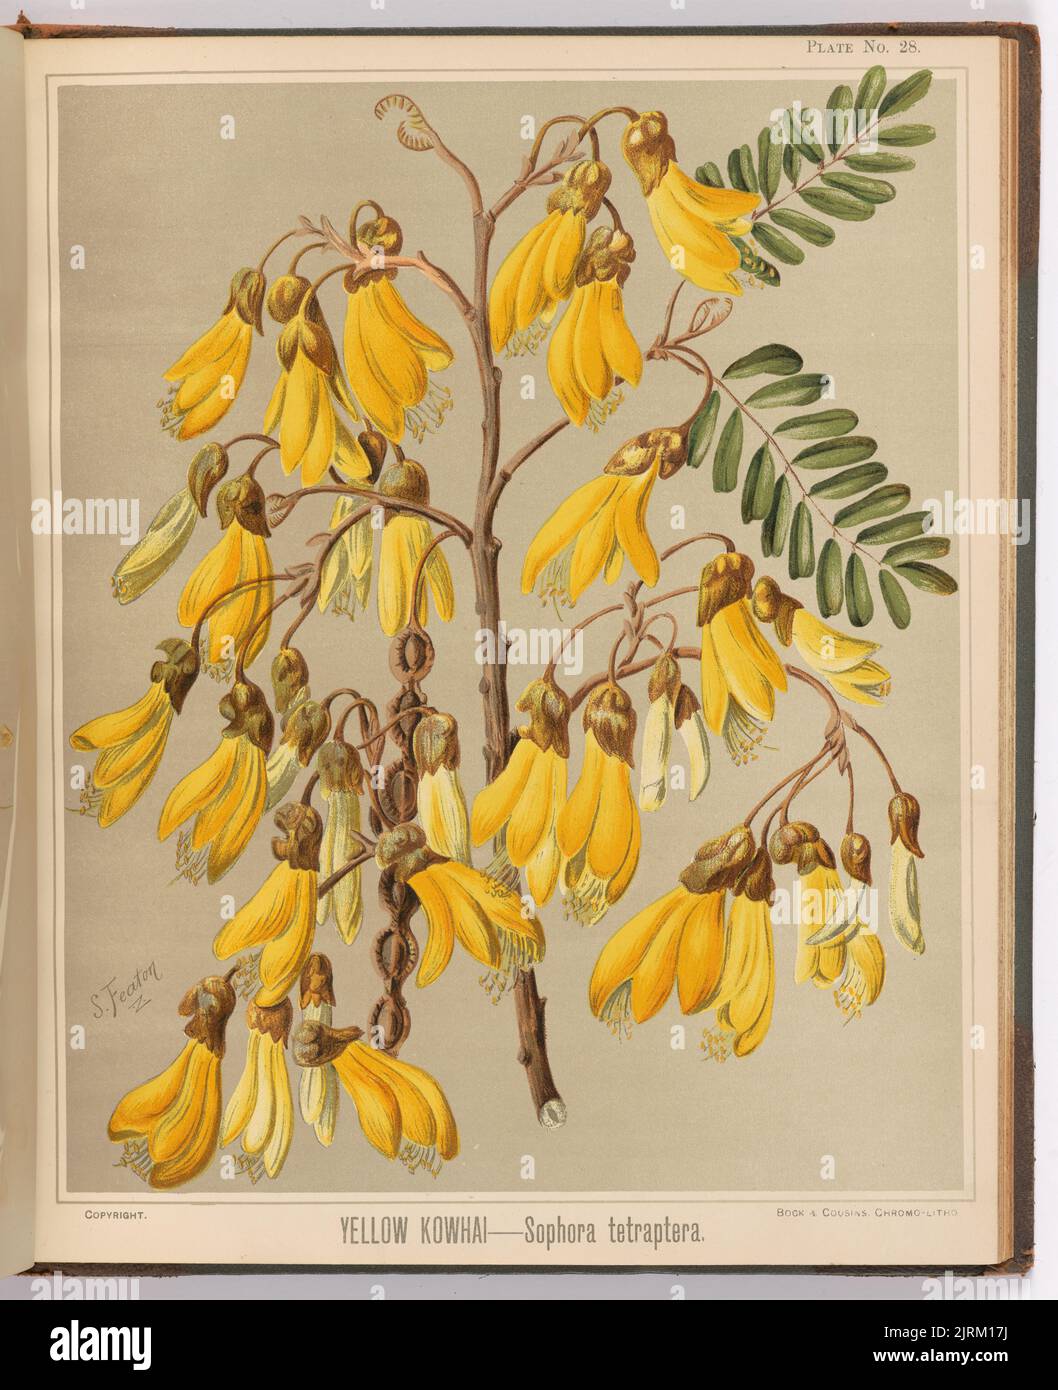 Yellow Kowhai - Sophora tetraptera. Plate 28. From the book: The art album of New Zealand flora : being a systematic and popular description of the native flowering plants of New Zealand and the adjacent islands : volume 1;., 1889, Gisborne, by Sarah Featon, Bock and Cousins. Stock Photo